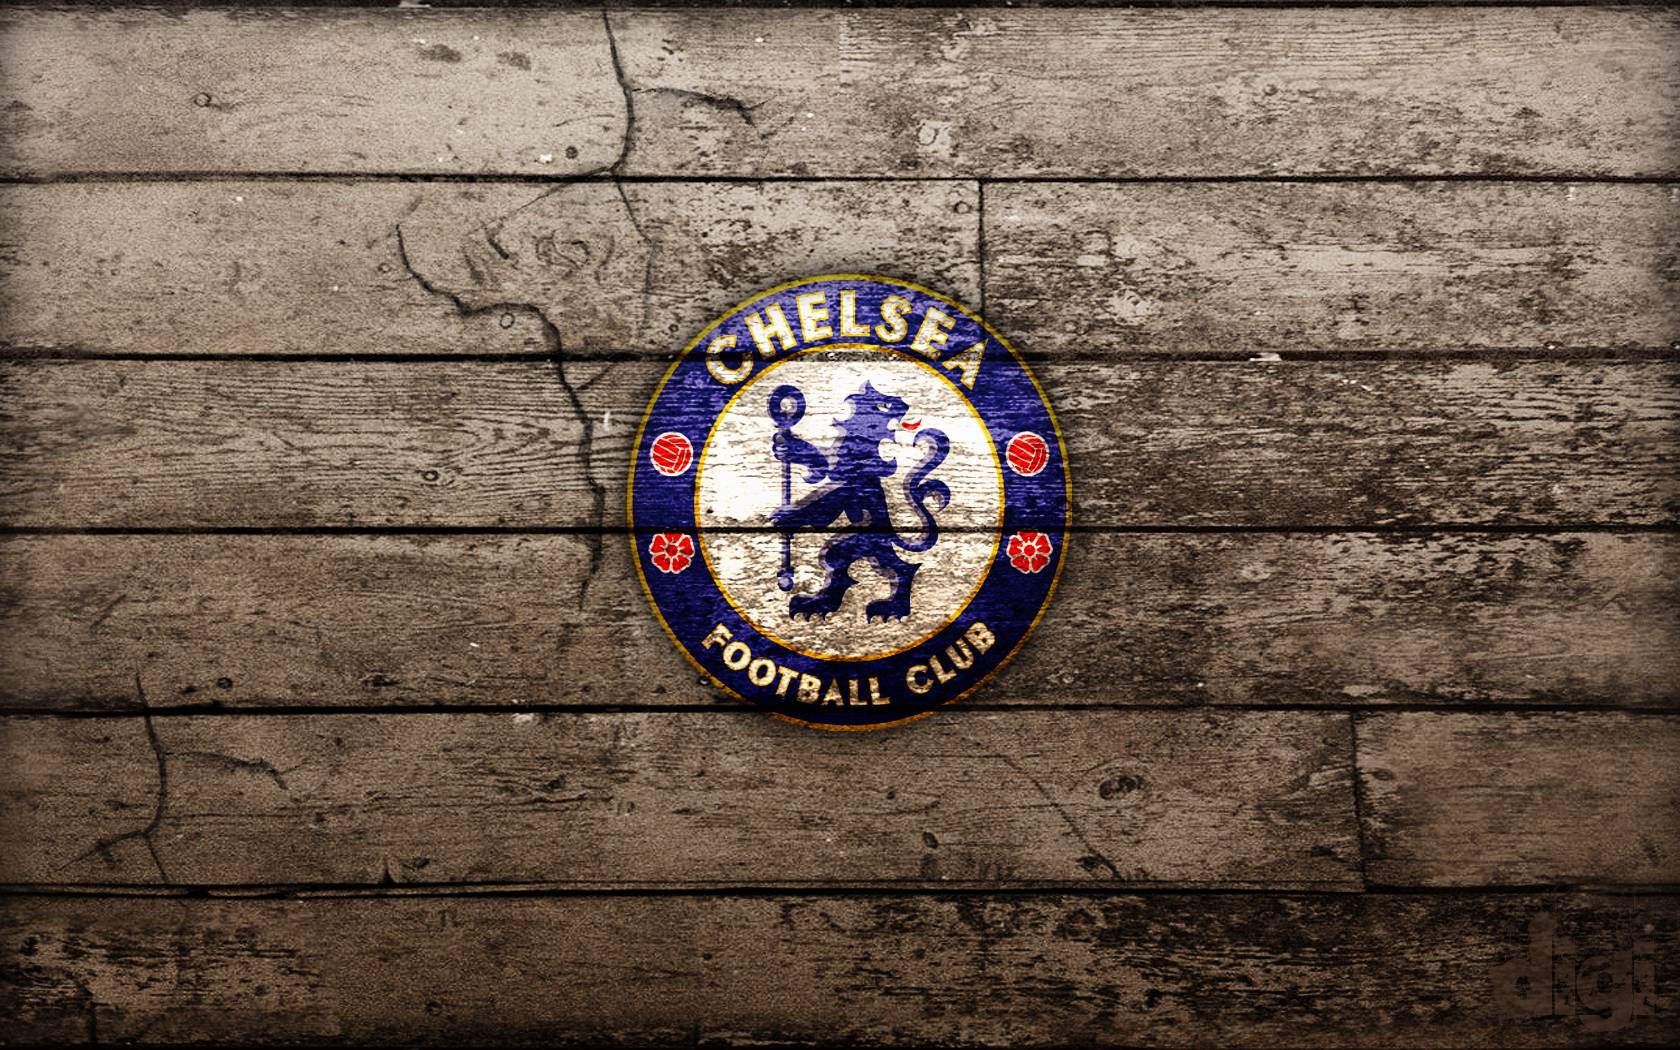 Chelsea Wallpaper Android Apps on Google Play. HD Wallpaper